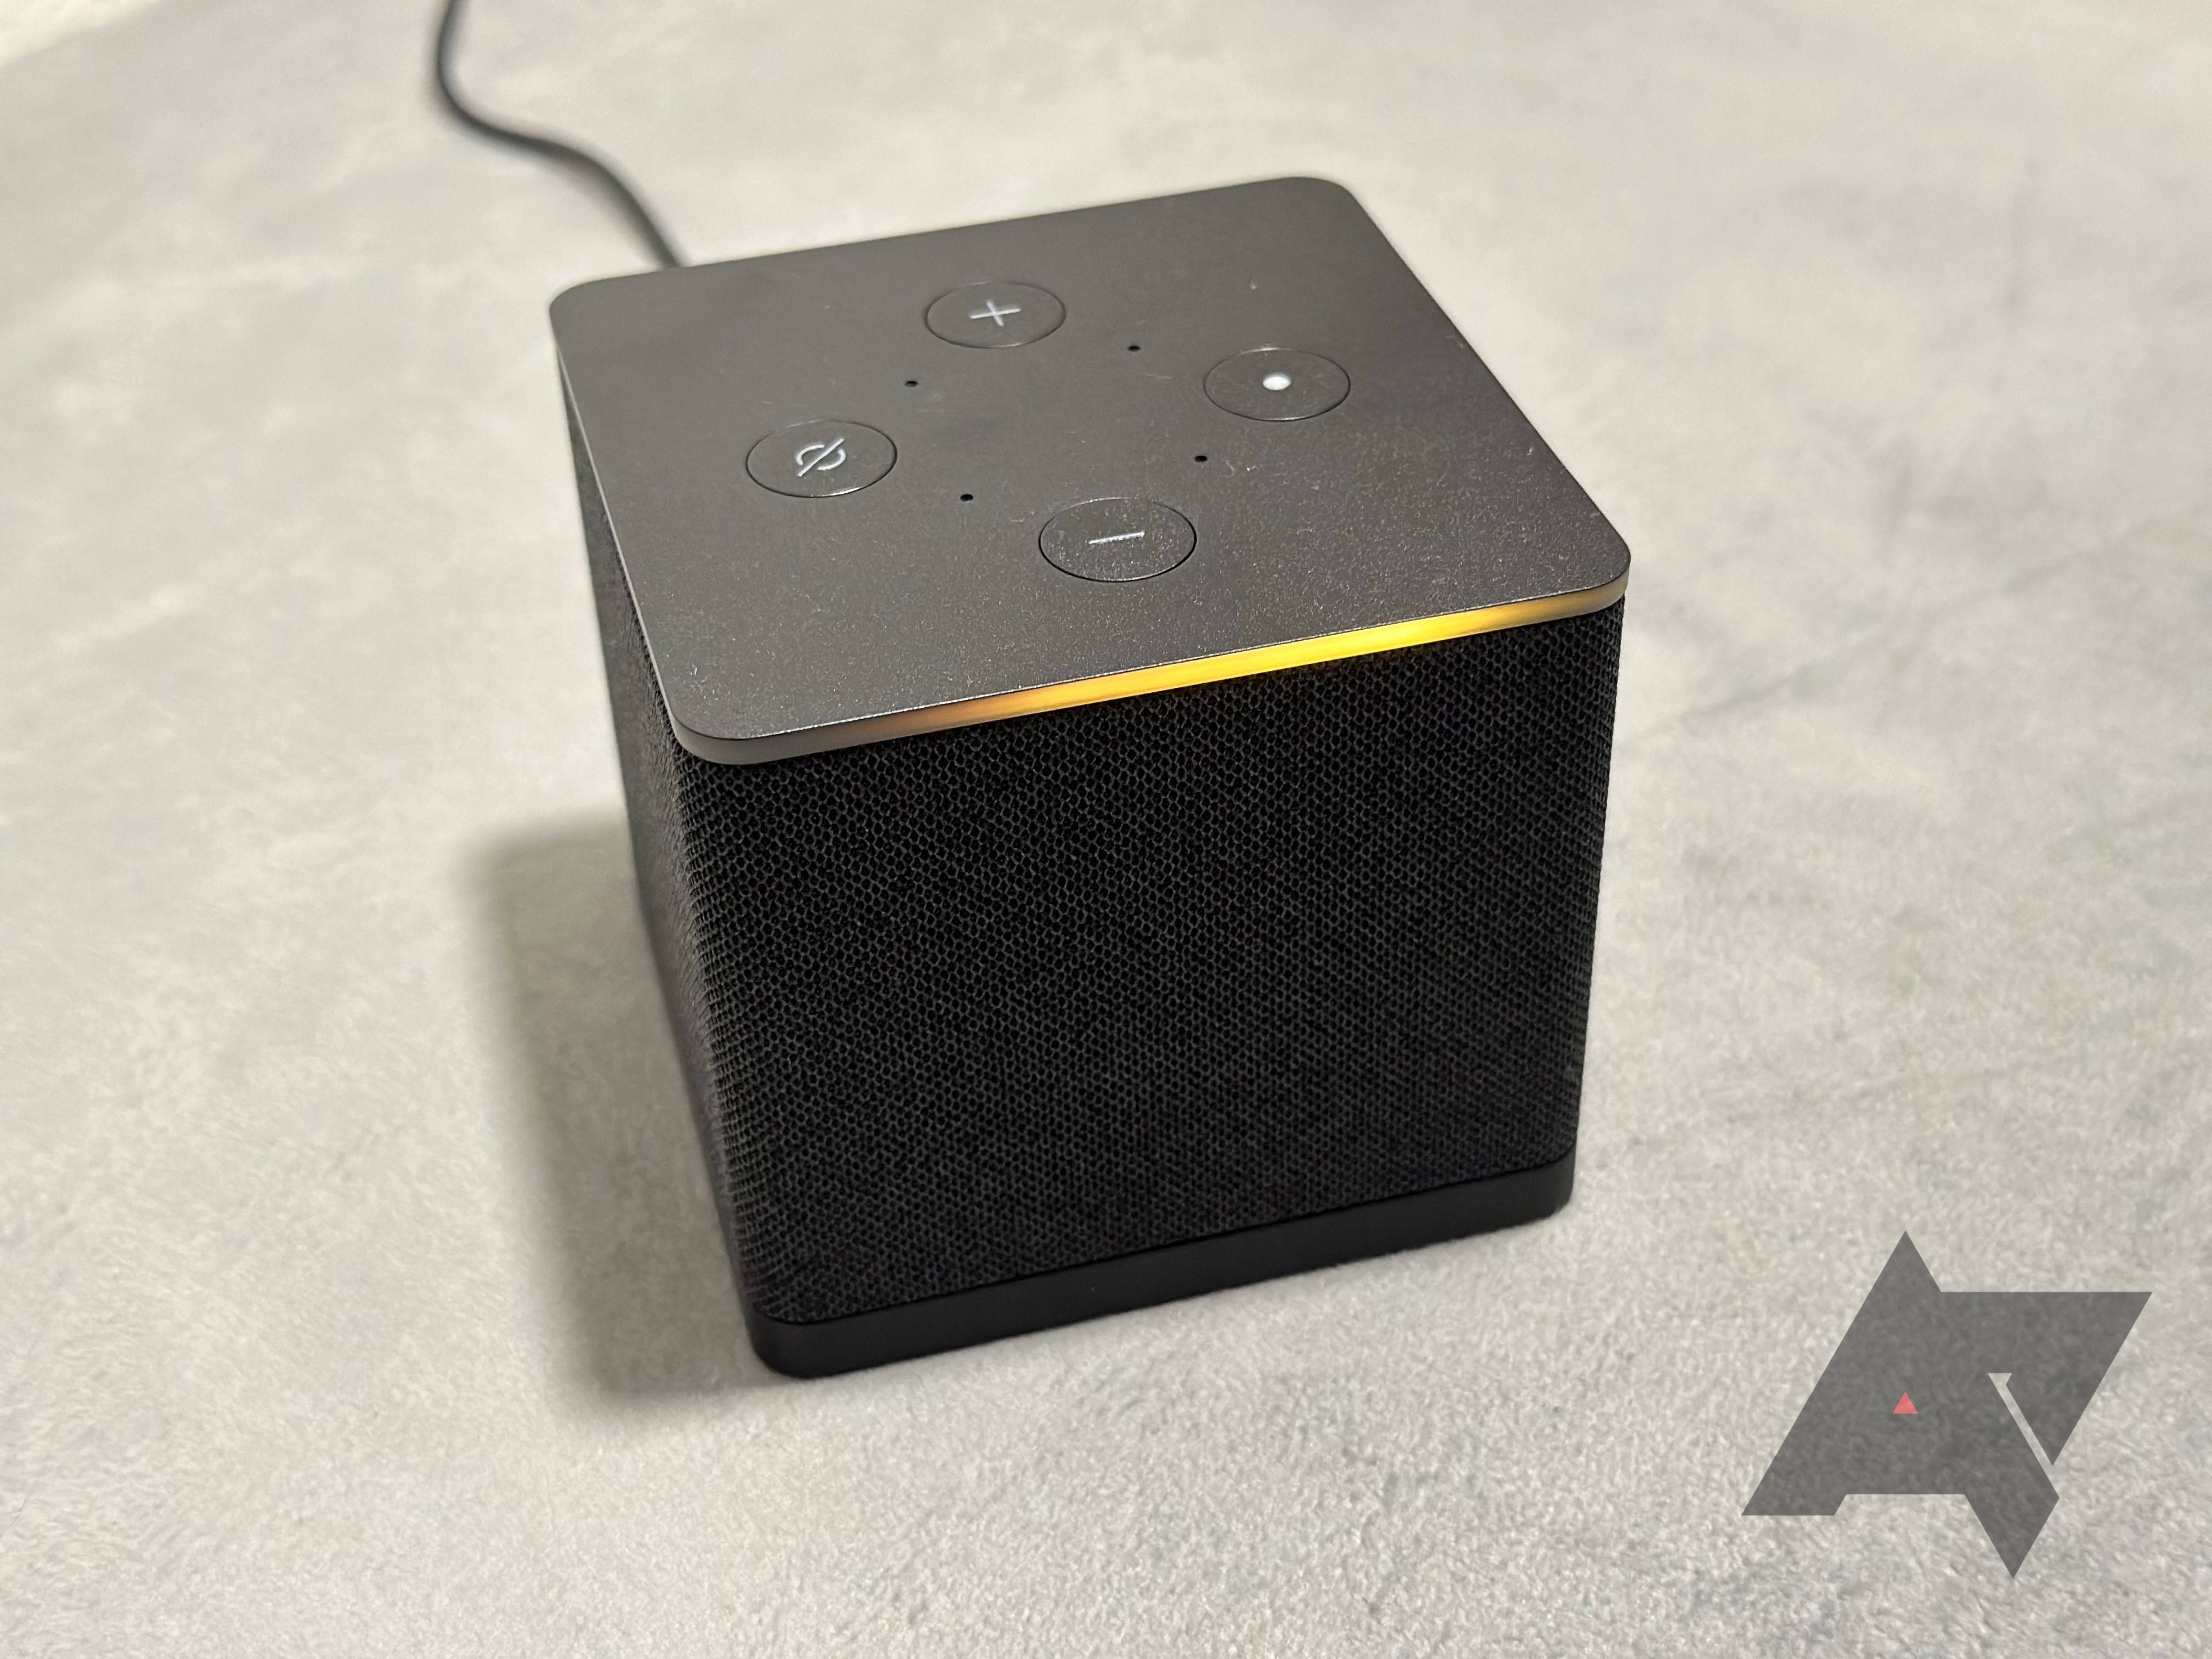 Amazon Fire TV Cube (3rd Gen): Smart, speedy, and packed with ads